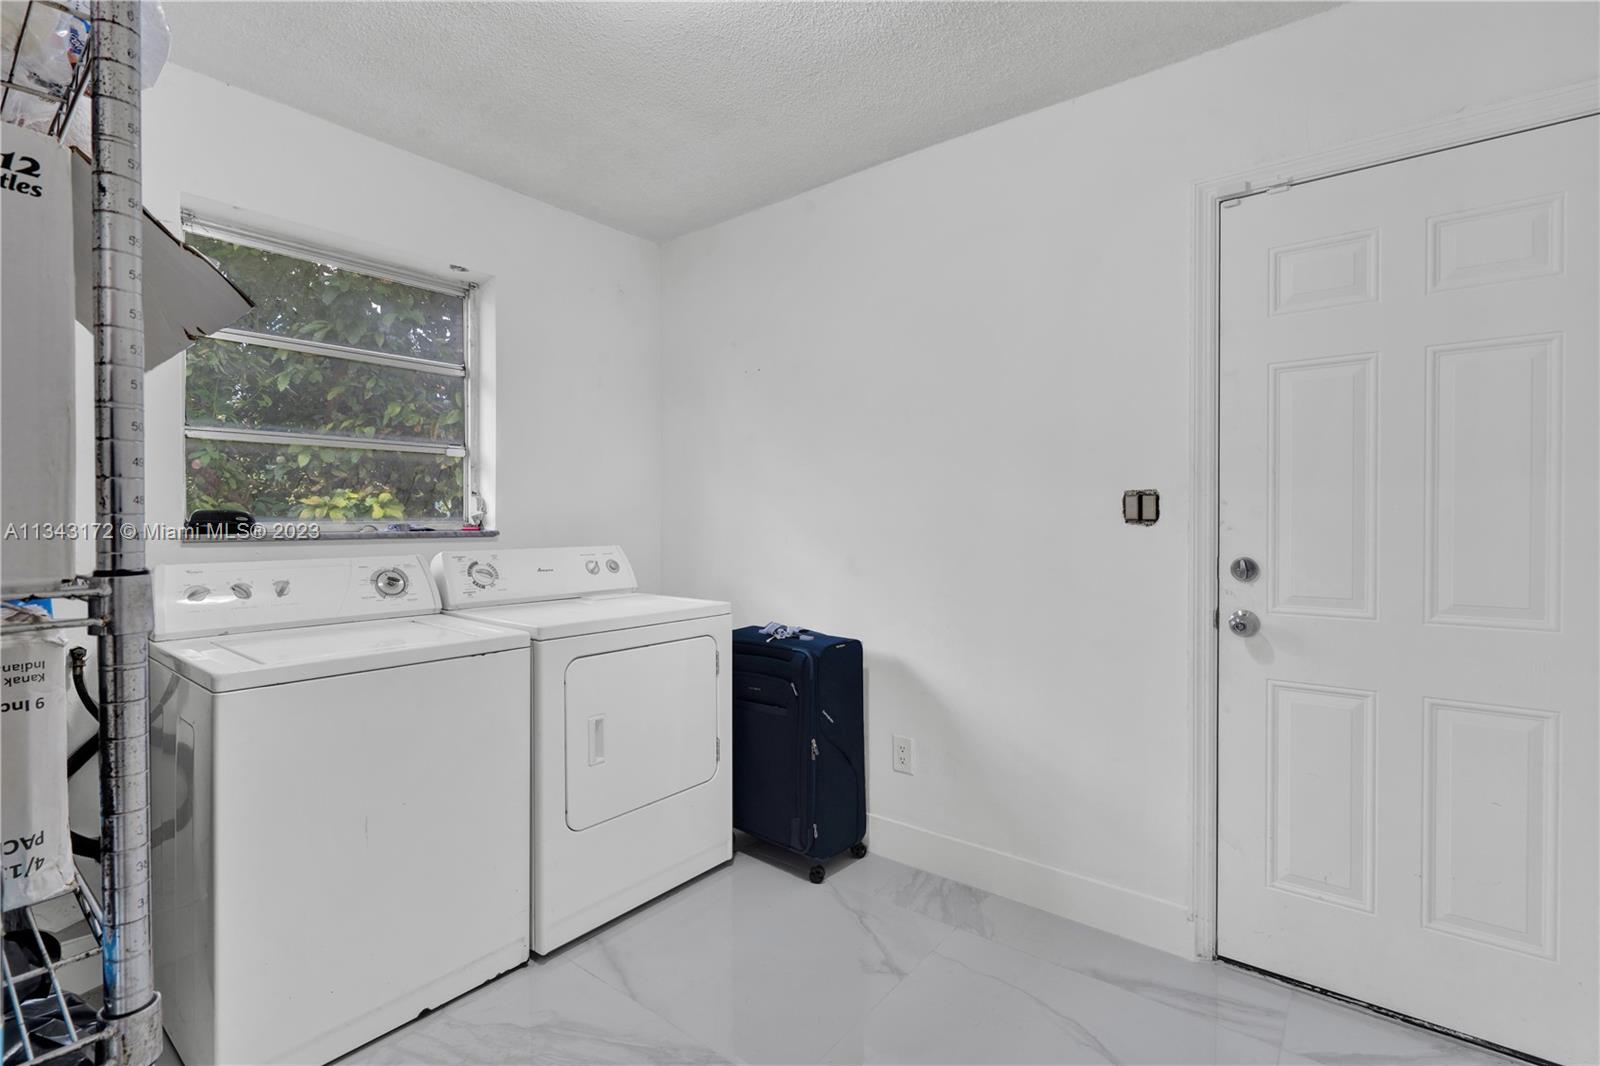 Separate Laundry Room adjacent to Garage